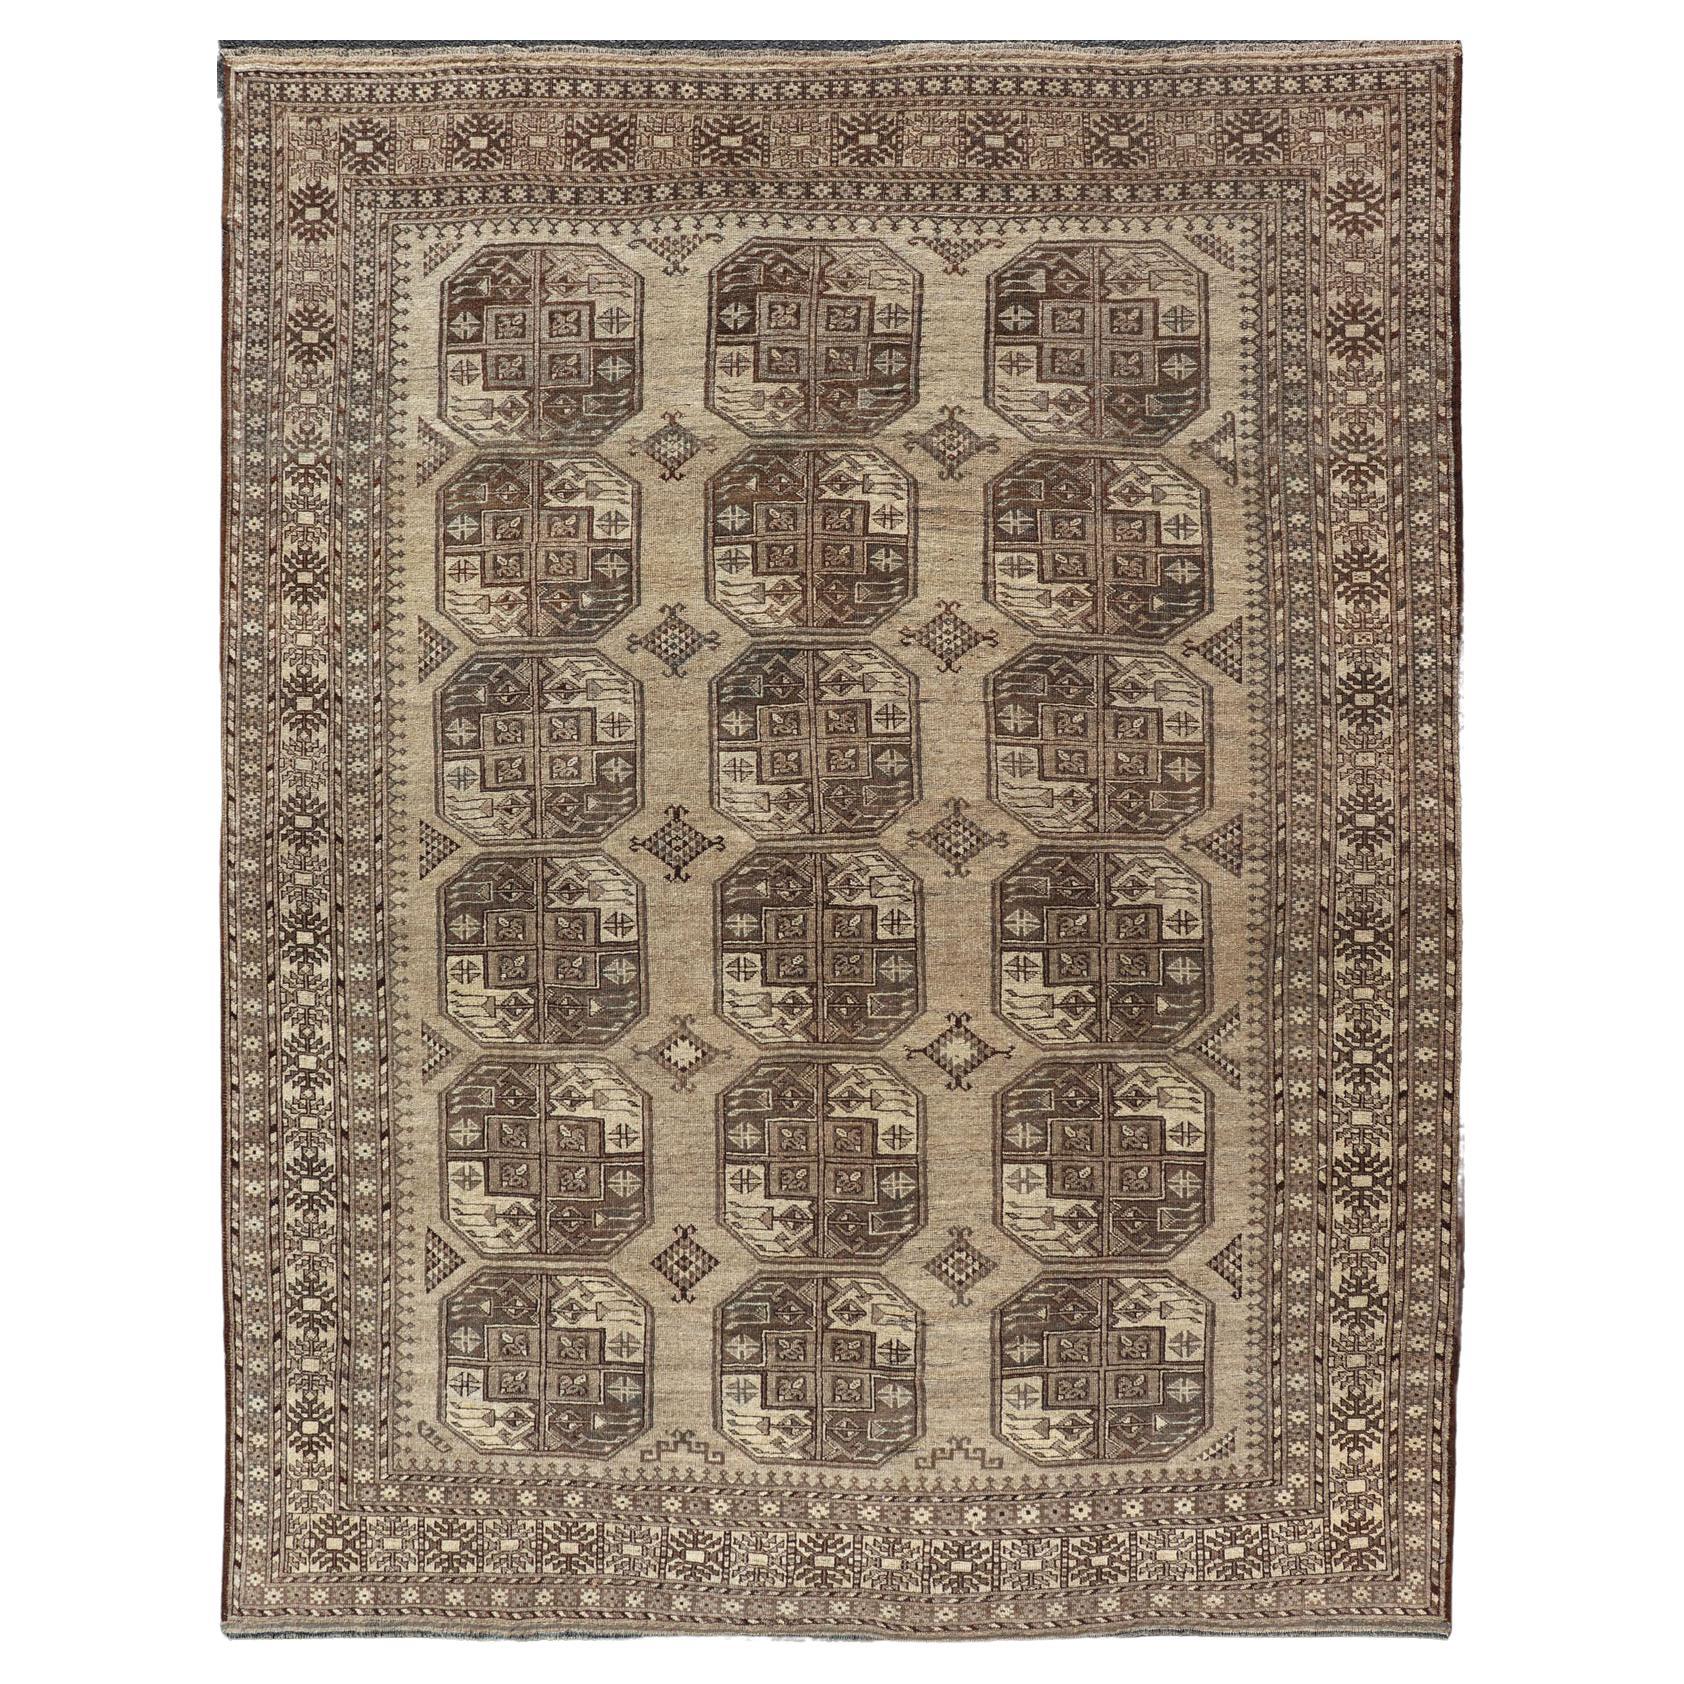 Hand-Knotted Turkomen Ersari Rug in Wool with All-Over Repeating Gul Design